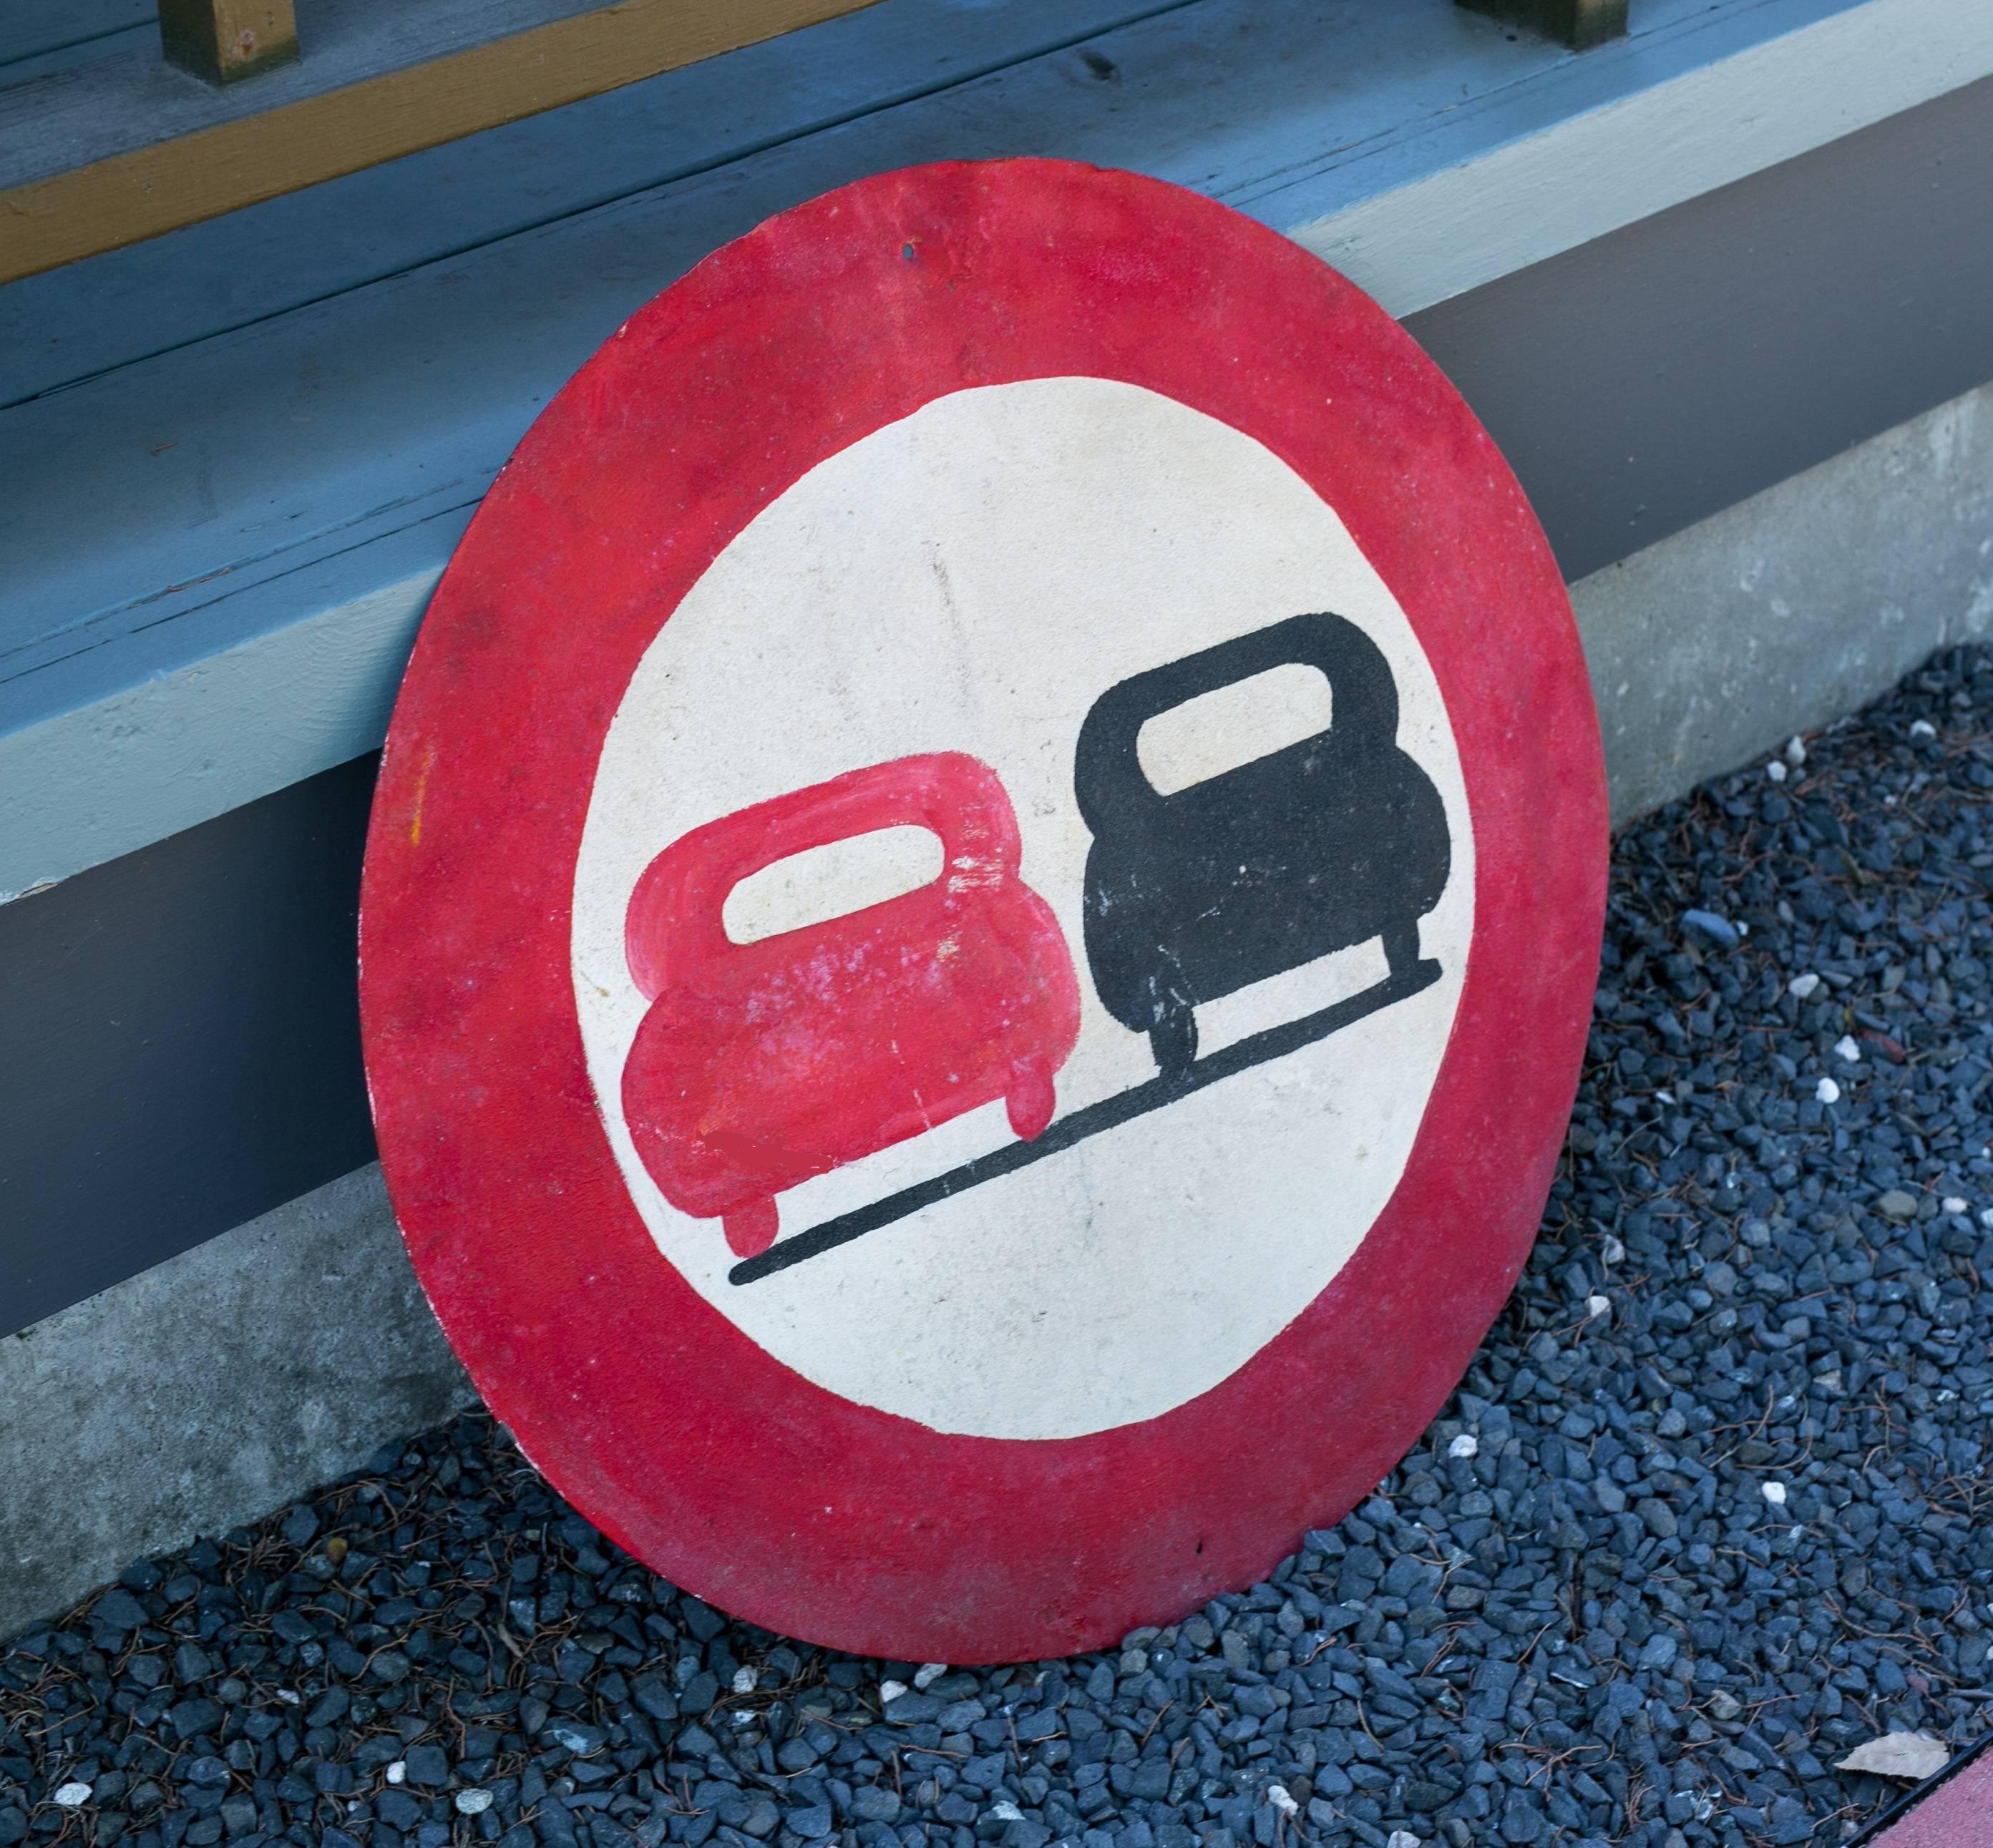 Graphic two car road safety sign from France, circa 1930. Hand-painted on metal with black, red and white paint.